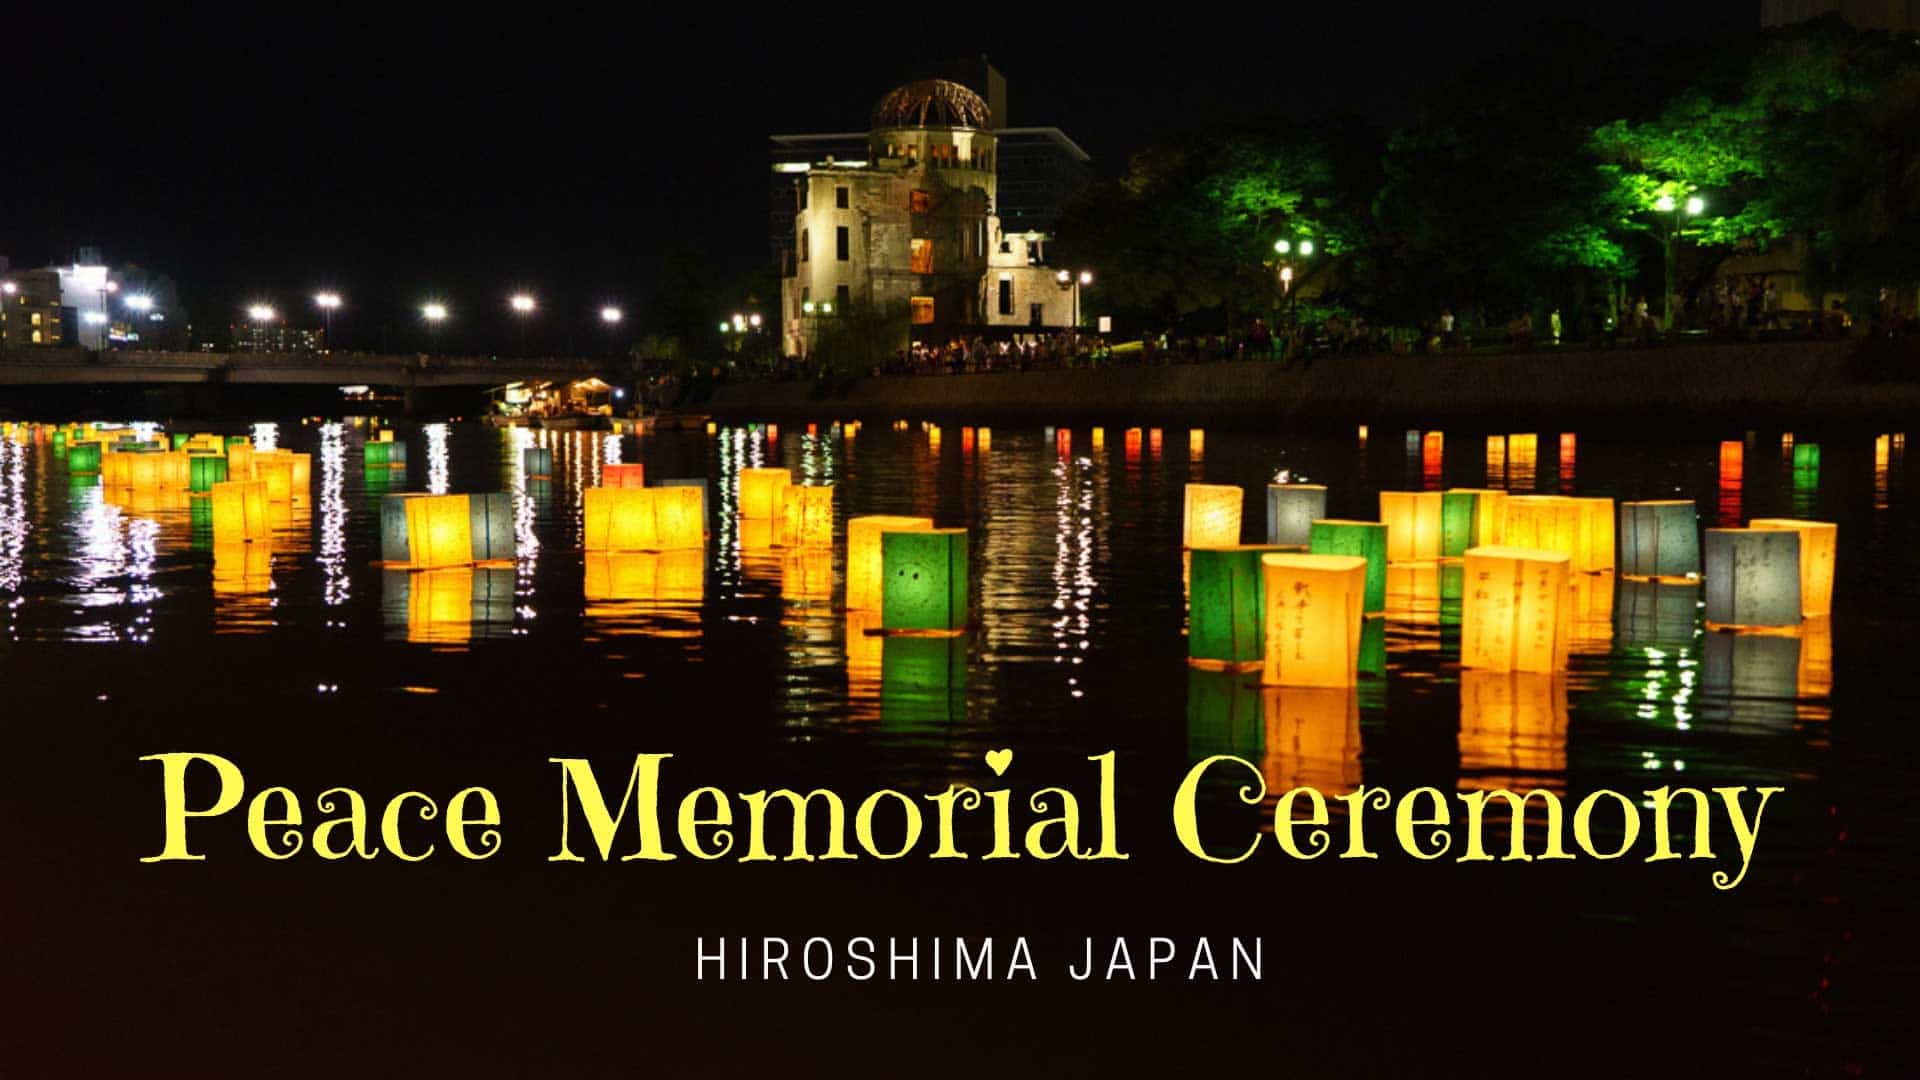 19-facts-about-hiroshima-peace-memorial-ceremony